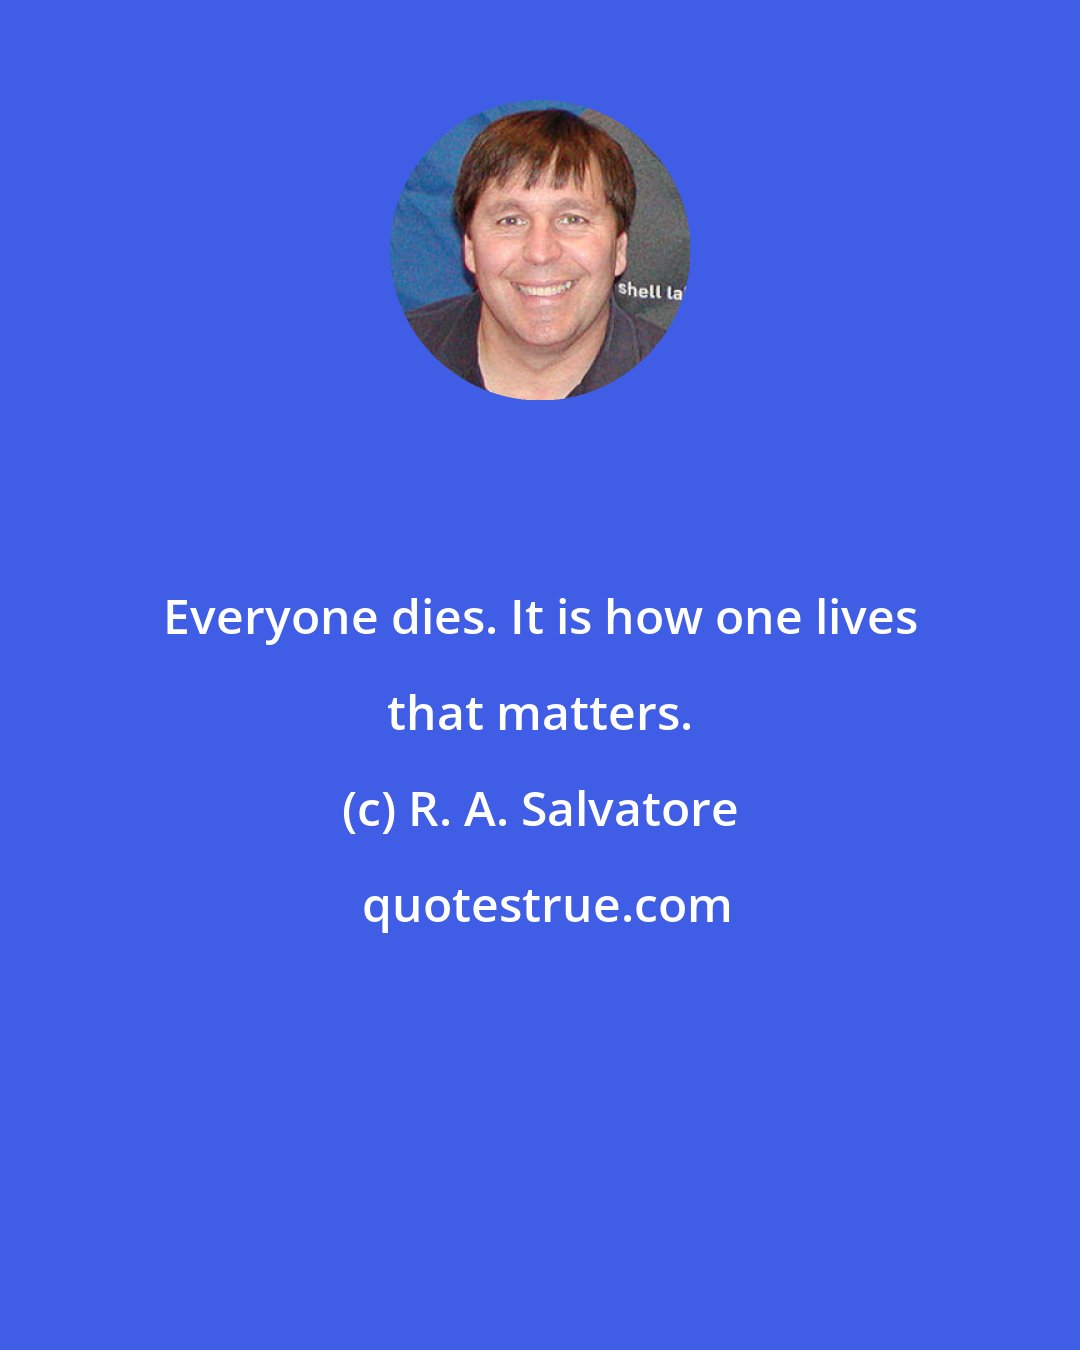 R. A. Salvatore: Everyone dies. It is how one lives that matters.